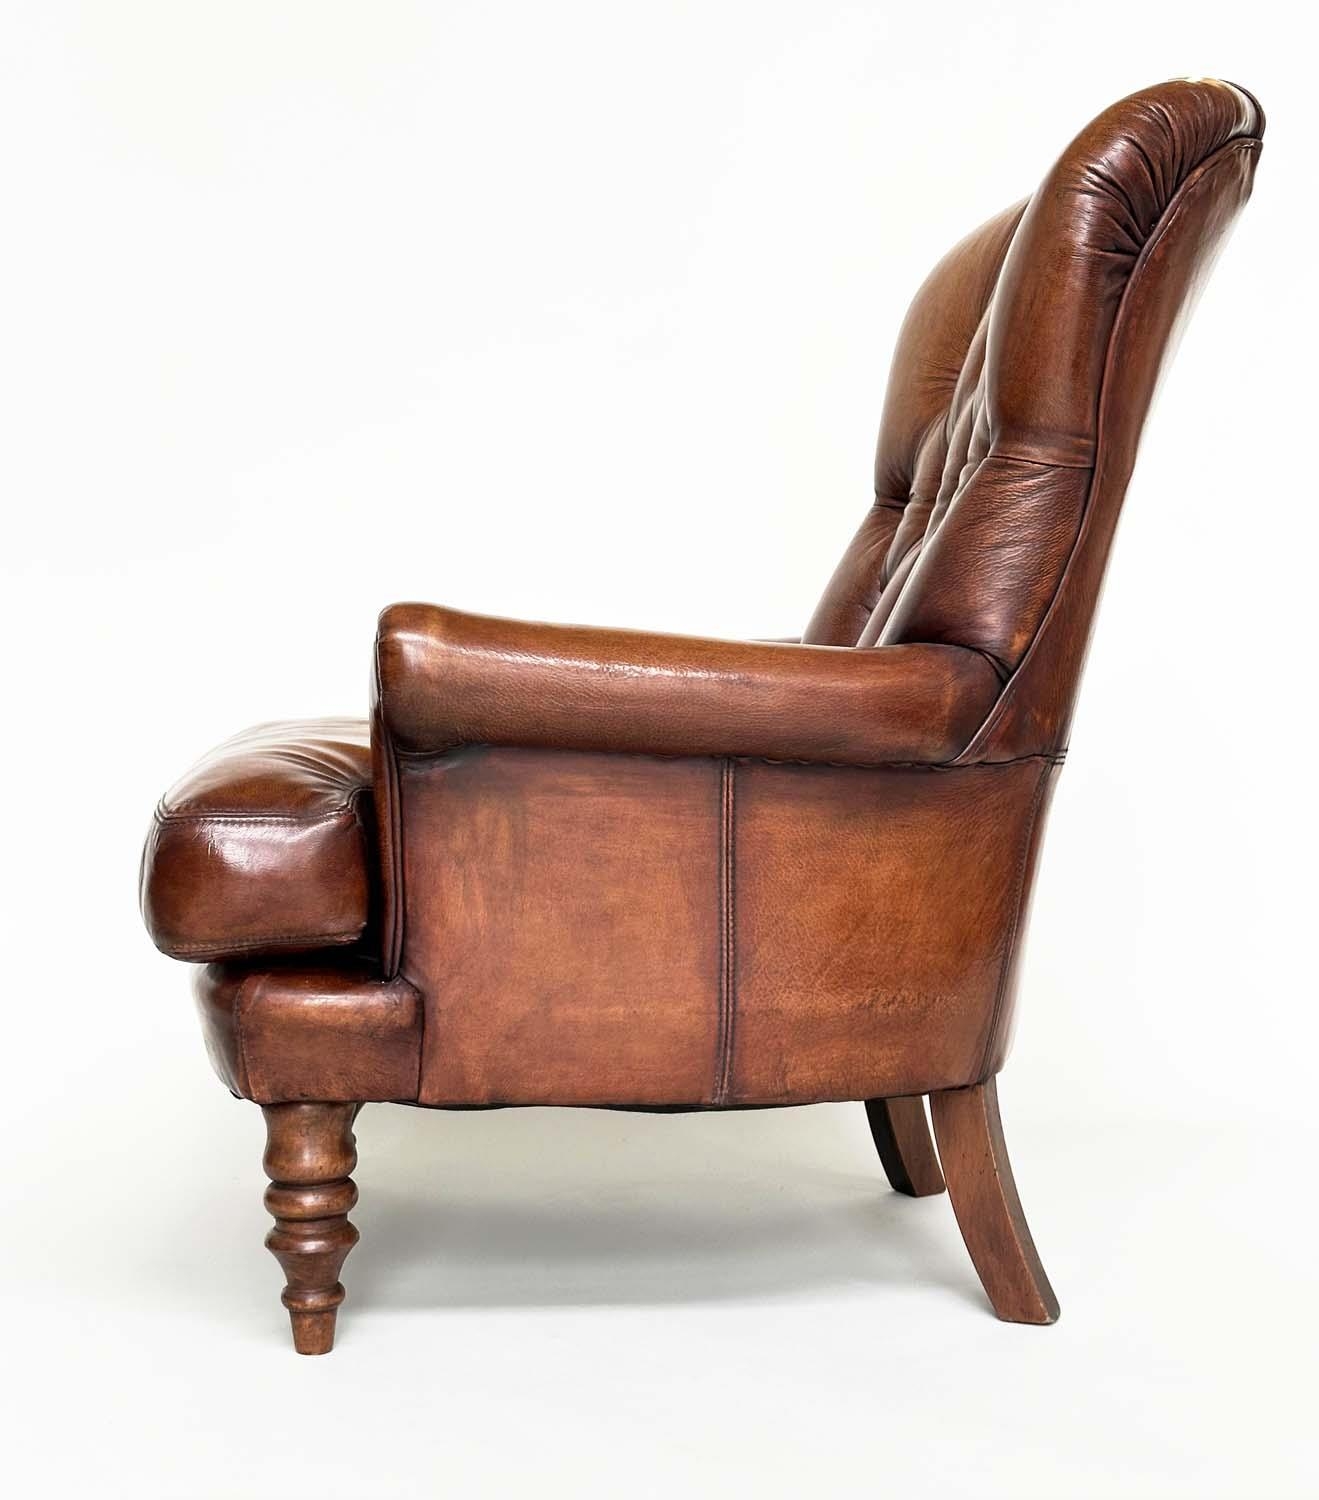 LIBRARY ARMCHAIR, Georgian design with deep buttoned soft natural tan brown leather upholstery and - Image 14 of 14